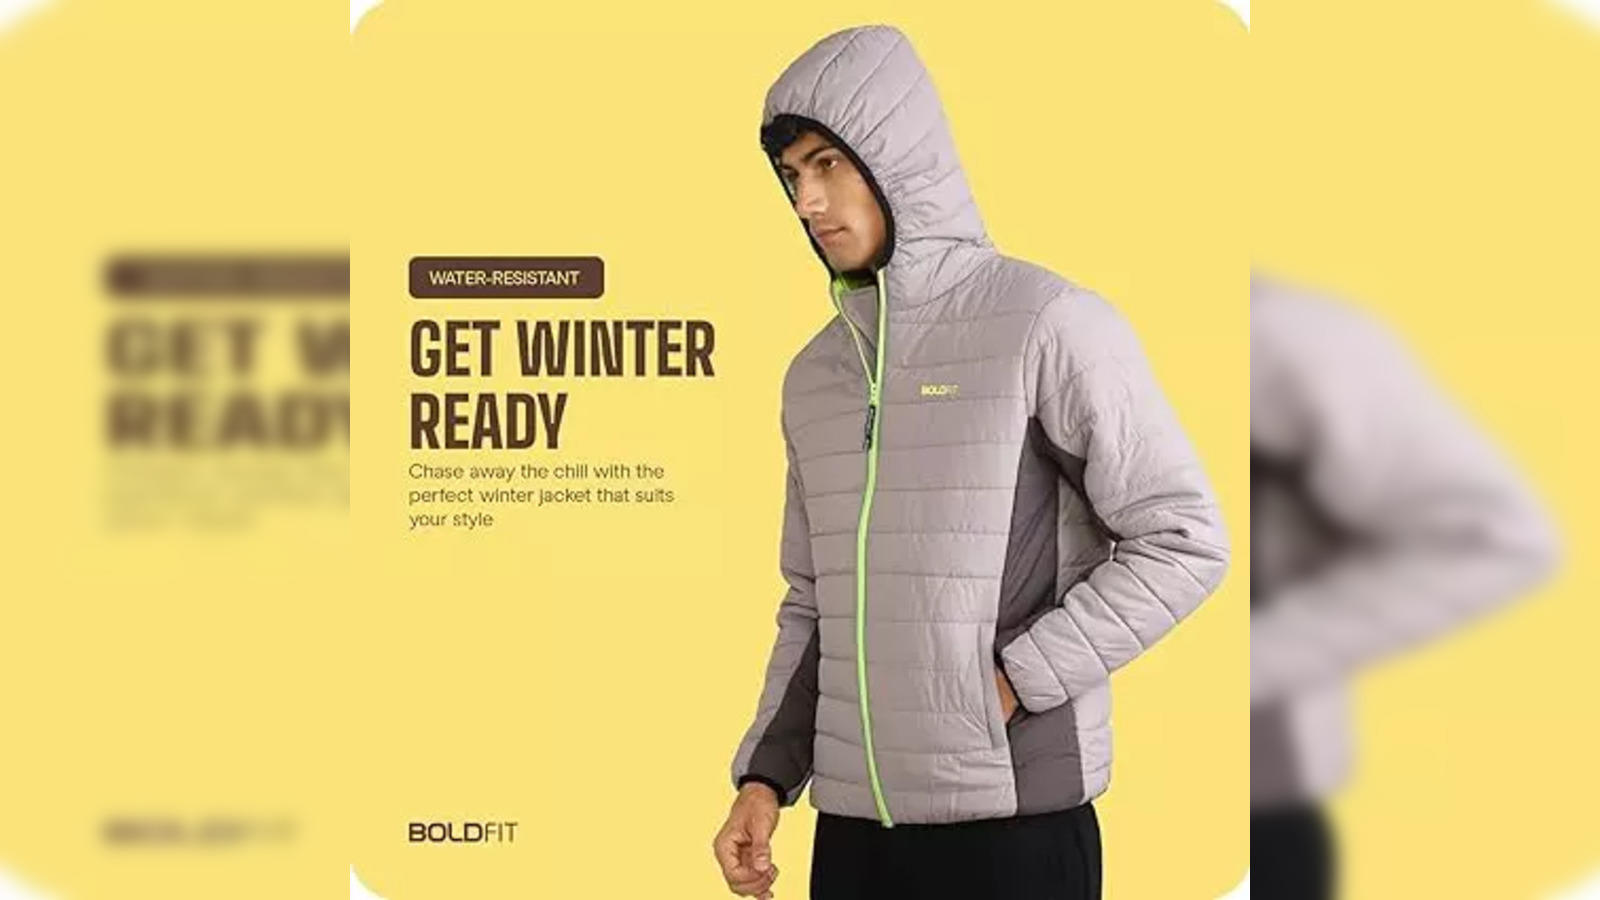 Slay Winter Fashion in Trending Winter Jackets For Men From Allen Solly's  Latest Collection - Men & Women Fashion Blog | Outfits & Styling Ideas for  Men - Allen Solly